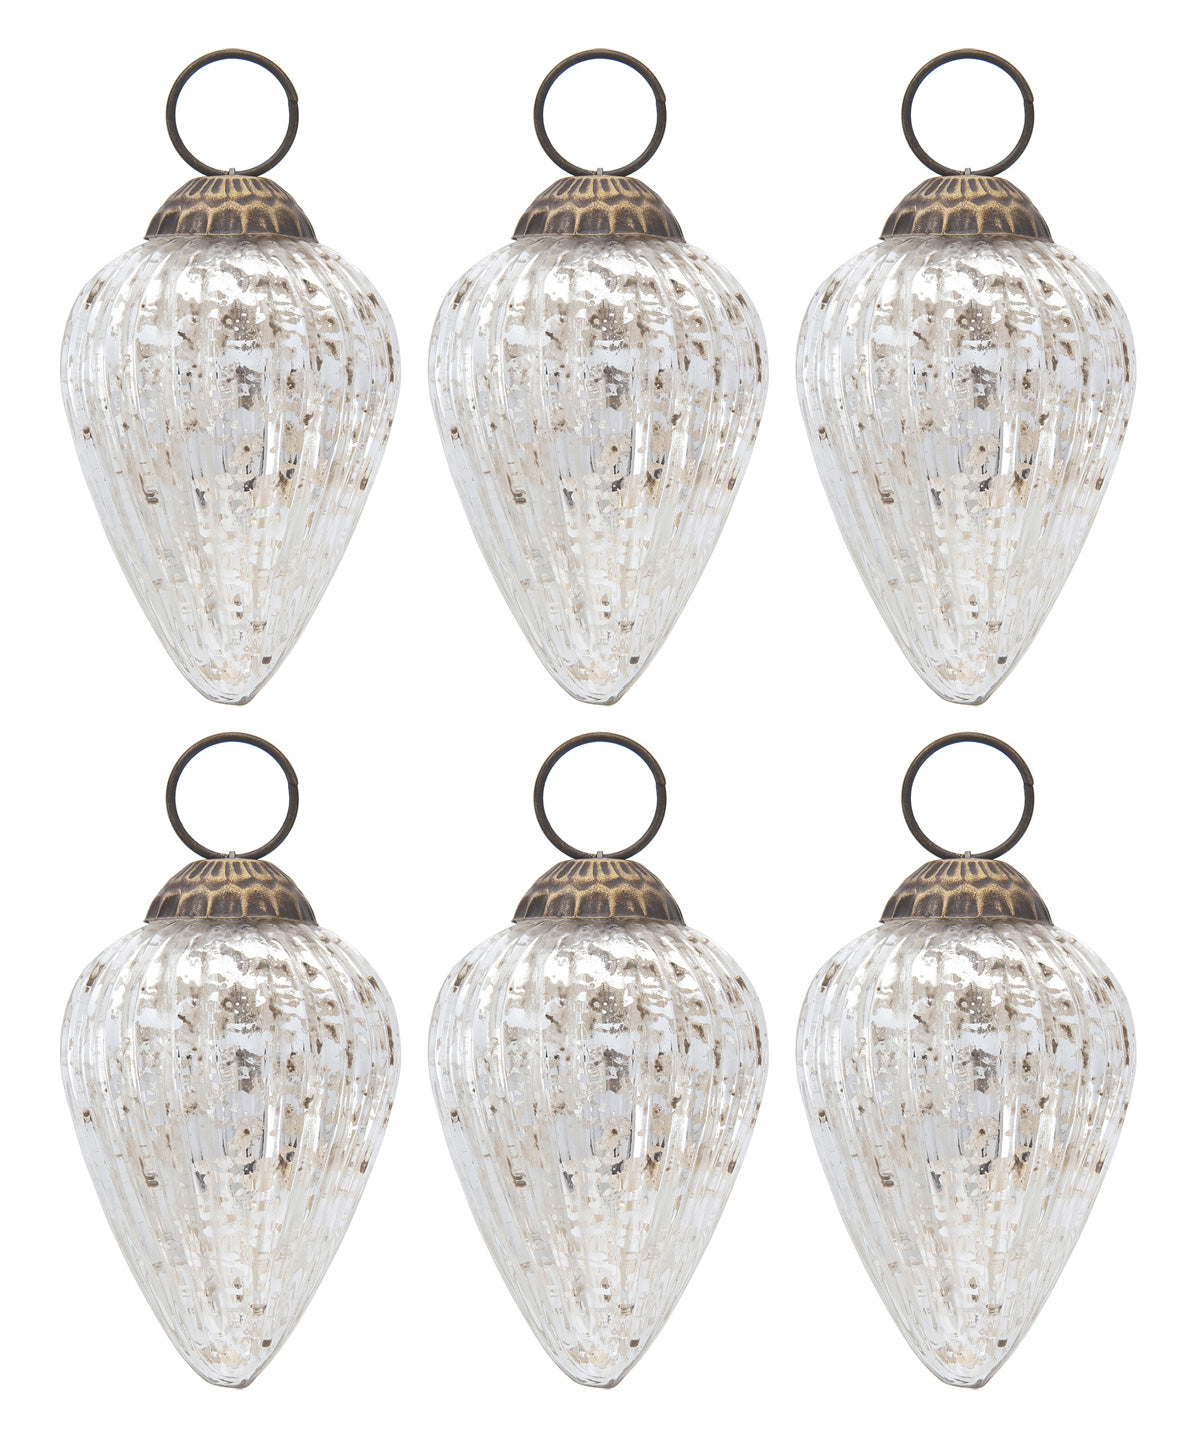 6 Pack | Small Mercury Glass Ornaments (3-inch, Silver, Laura Design) - Great Gift Idea, Vintage-Style Decorations for Christmas, Special Occasions, Home Decor and Parties